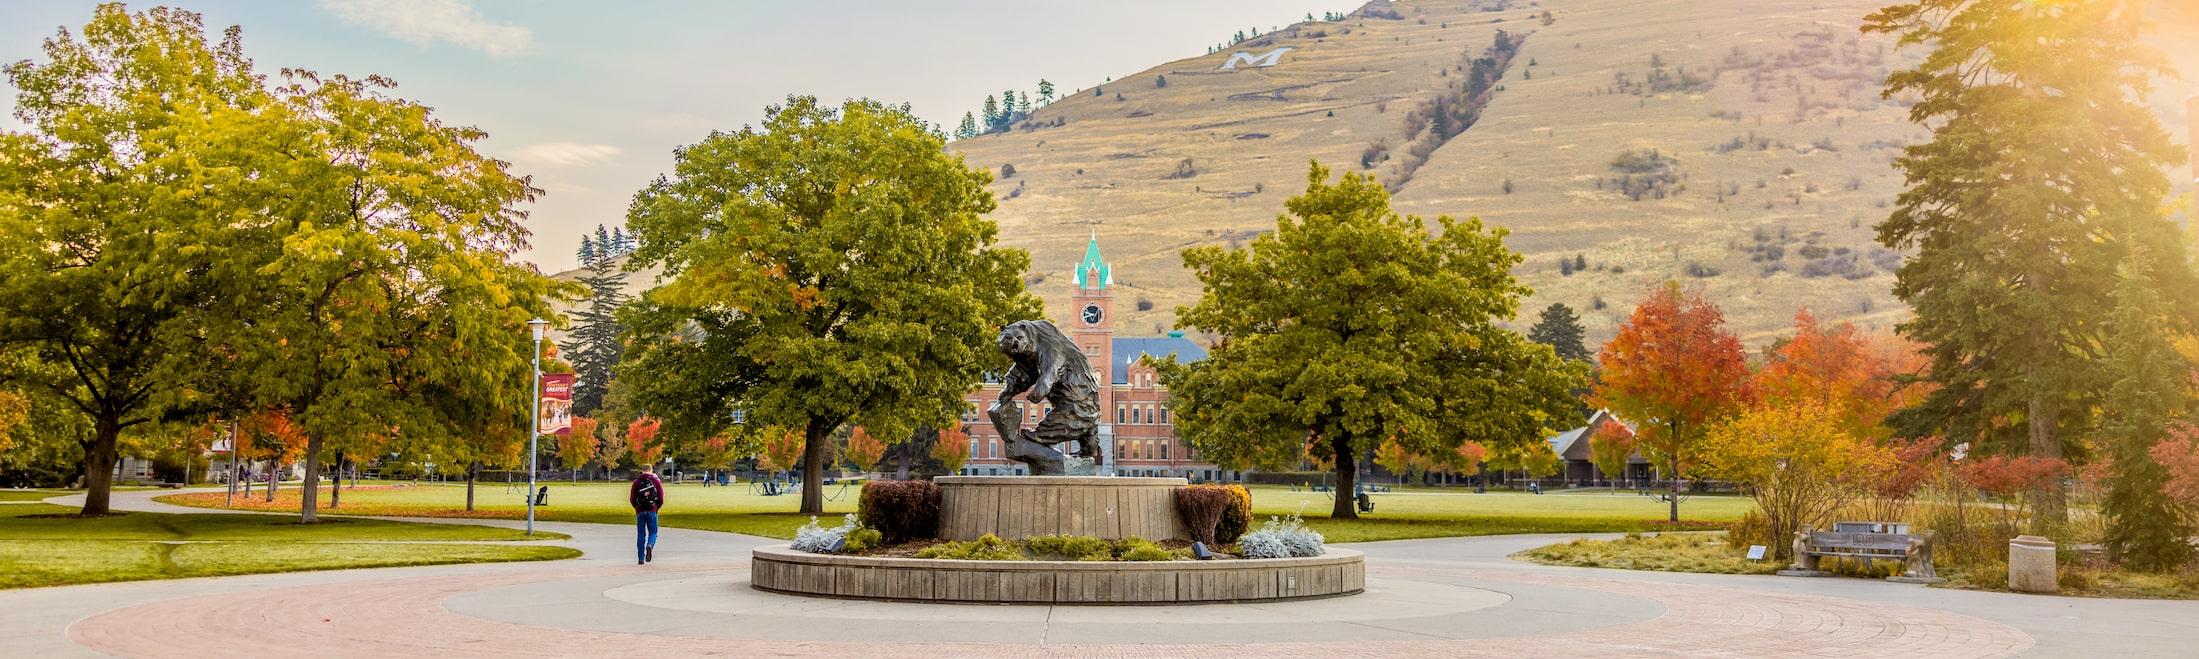 Capturing the Colors: The Best Fall Photography Spots in Missoula